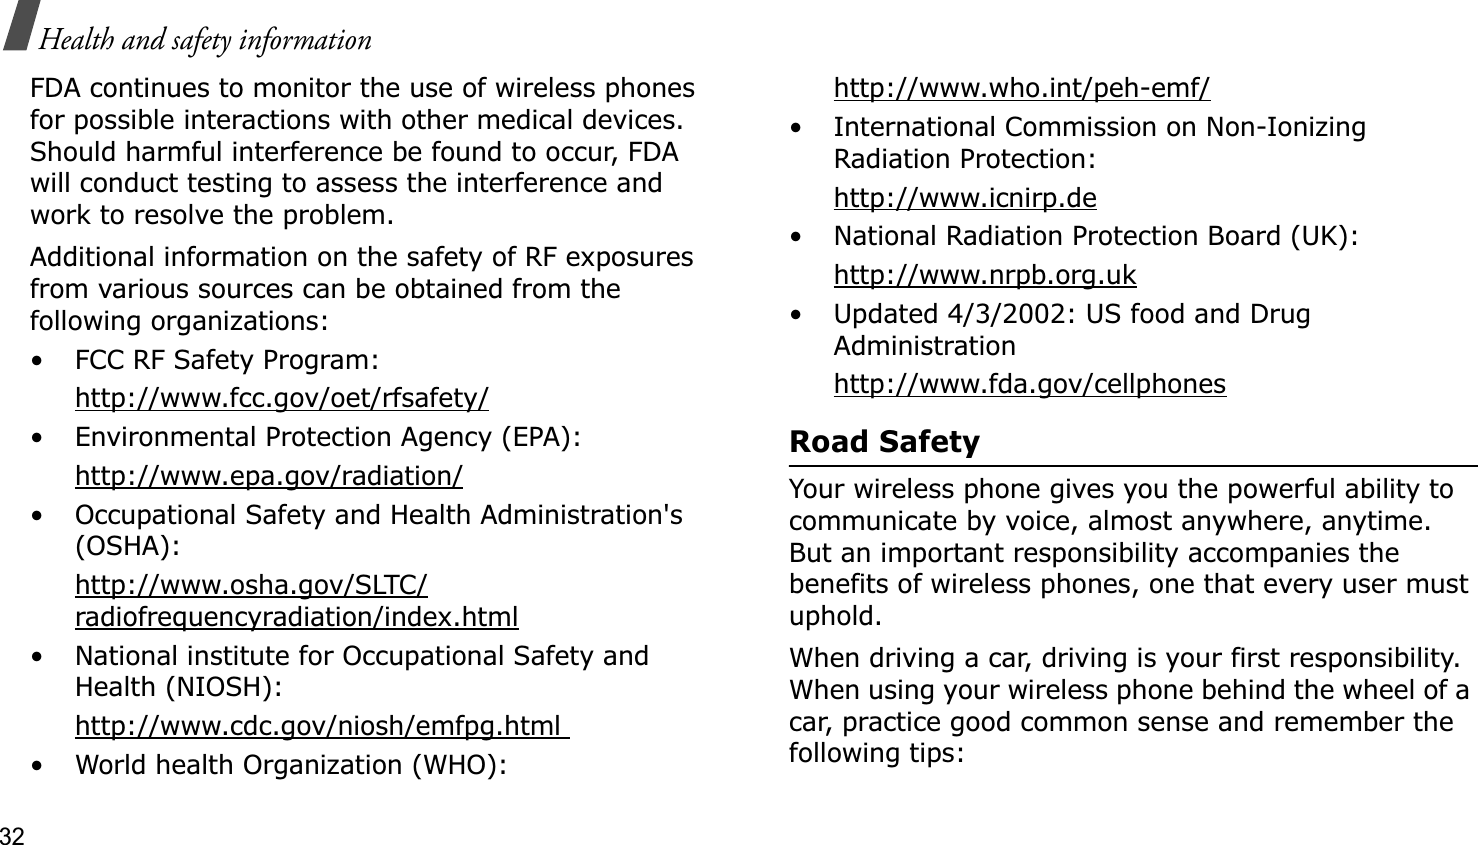 32Health and safety informationFDA continues to monitor the use of wireless phones for possible interactions with other medical devices. Should harmful interference be found to occur, FDA will conduct testing to assess the interference and work to resolve the problem.Additional information on the safety of RF exposures from various sources can be obtained from the following organizations:• FCC RF Safety Program:http://www.fcc.gov/oet/rfsafety/• Environmental Protection Agency (EPA):http://www.epa.gov/radiation/• Occupational Safety and Health Administration&apos;s (OSHA): http://www.osha.gov/SLTC/radiofrequencyradiation/index.html• National institute for Occupational Safety and Health (NIOSH):http://www.cdc.gov/niosh/emfpg.html • World health Organization (WHO):http://www.who.int/peh-emf/• International Commission on Non-Ionizing Radiation Protection:http://www.icnirp.de• National Radiation Protection Board (UK):http://www.nrpb.org.uk• Updated 4/3/2002: US food and Drug Administrationhttp://www.fda.gov/cellphonesRoad SafetyYour wireless phone gives you the powerful ability to communicate by voice, almost anywhere, anytime. But an important responsibility accompanies the benefits of wireless phones, one that every user must uphold.When driving a car, driving is your first responsibility. When using your wireless phone behind the wheel of a car, practice good common sense and remember the following tips: